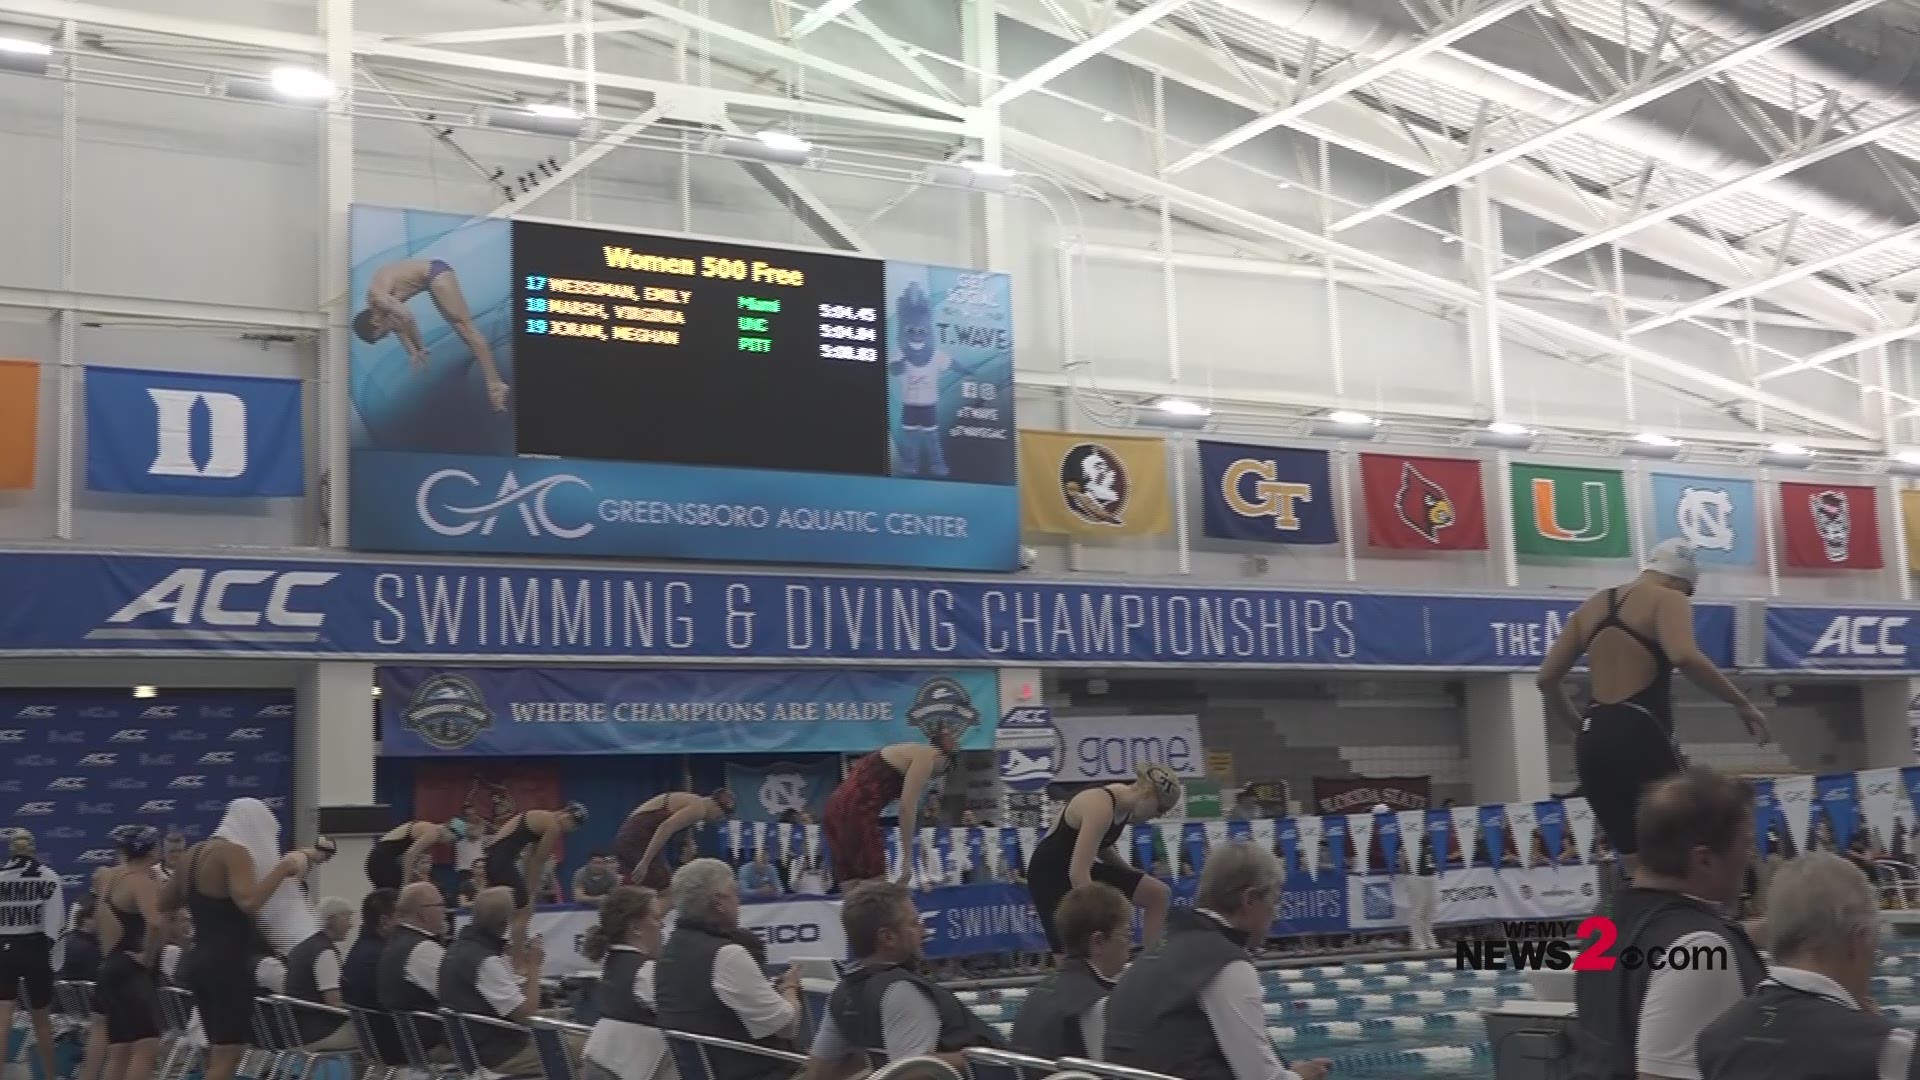 The 2019 ACC Swimming and Diving Championship is underway at the Greensboro Aquatic Center, the same facility Virginia Tech freshman diver Noah Zawadski once fought for.